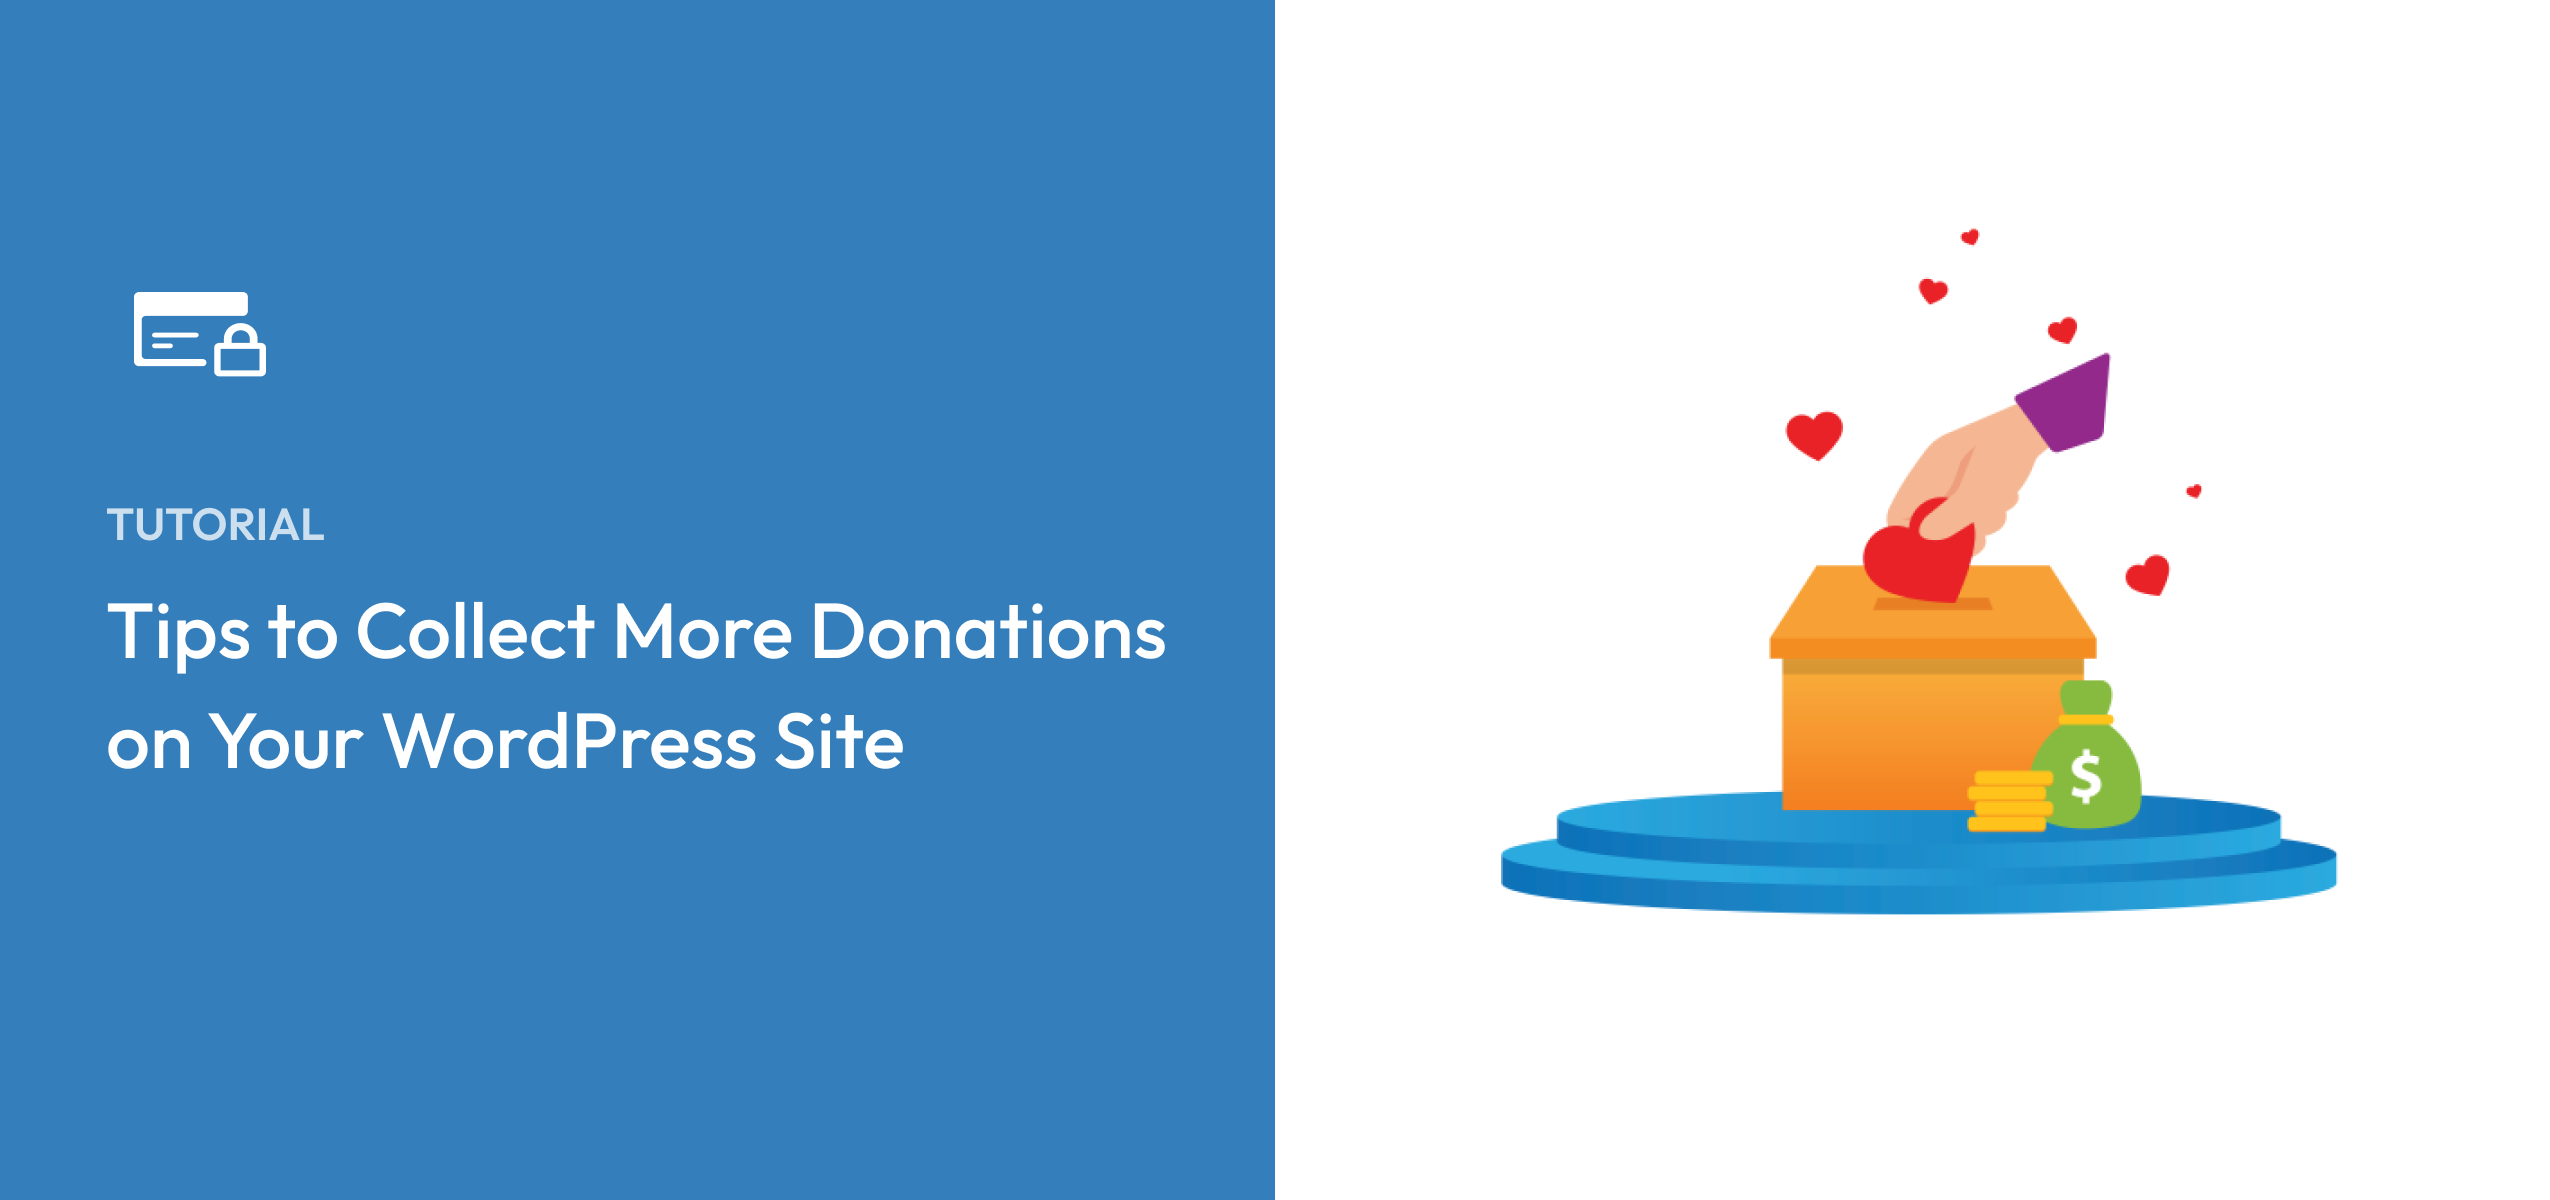 How to Get Donations: 11 Simple Tactics for Nonprofits